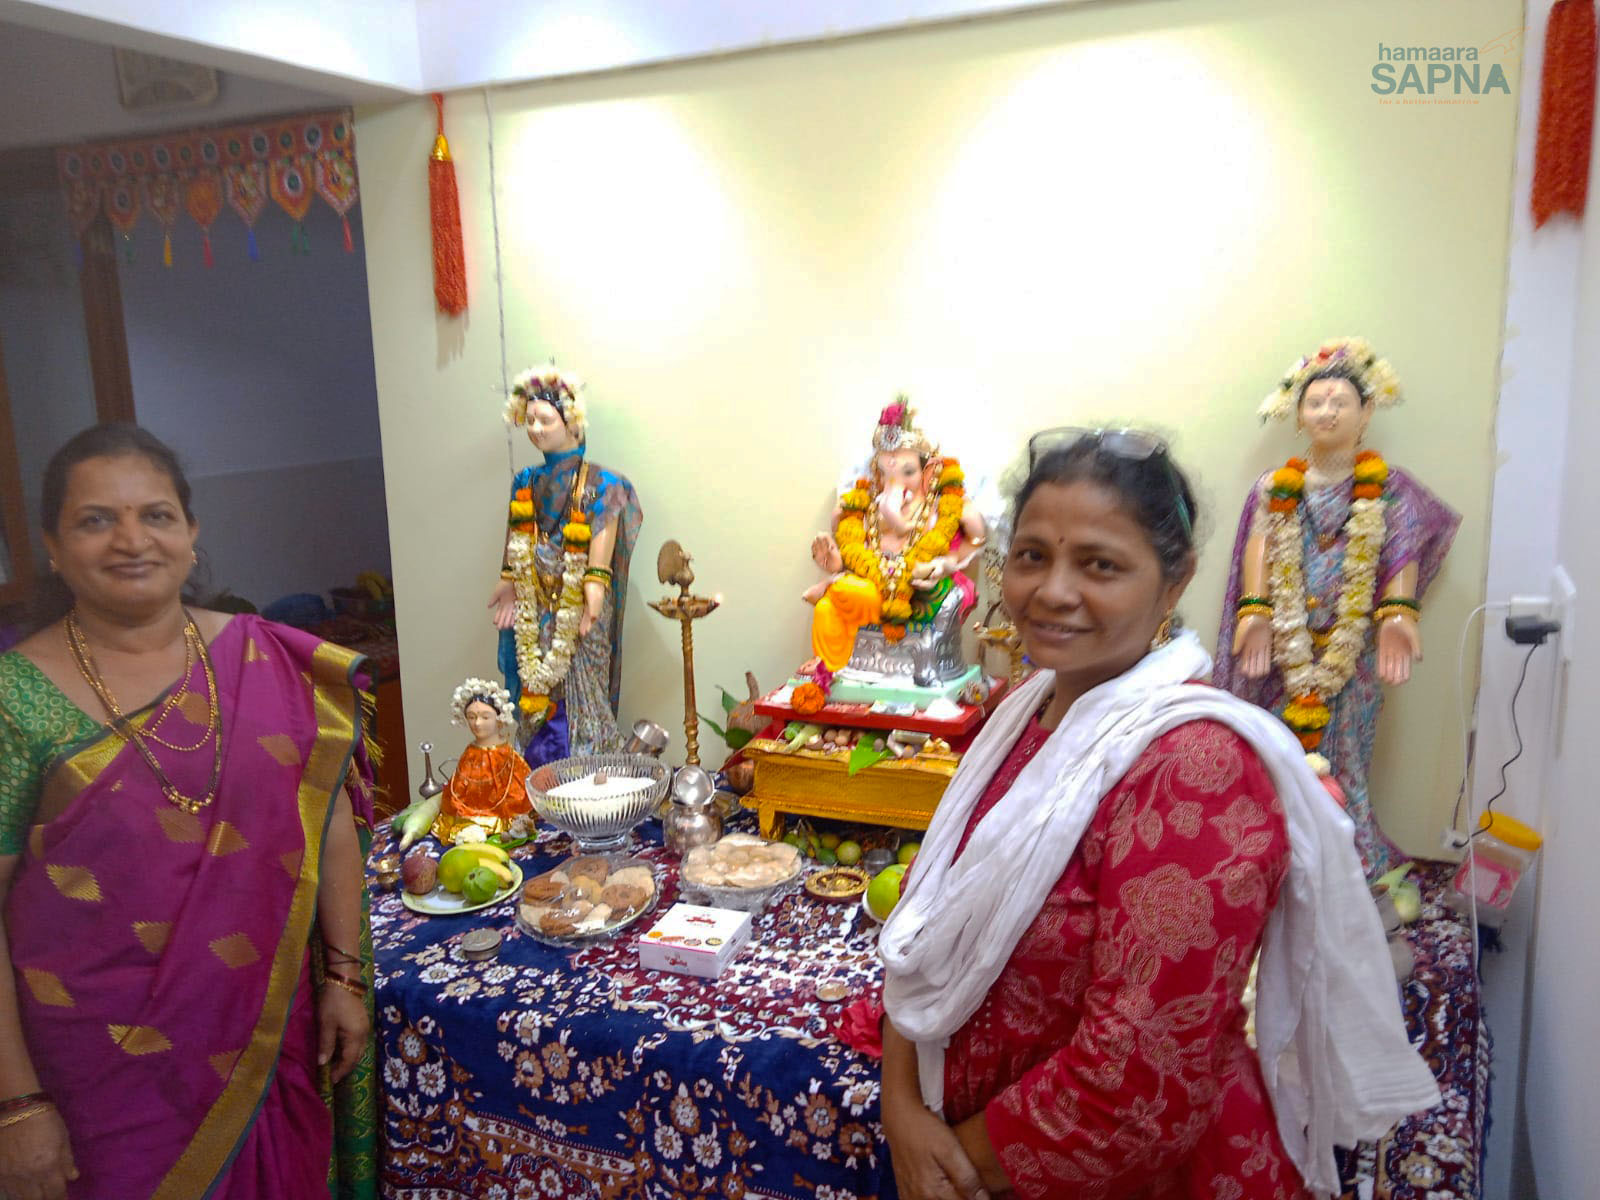 Just completed an arti at the home of a beneficiary. The idols, the set up and the offerings all show the love that each one has for this special and popular God.